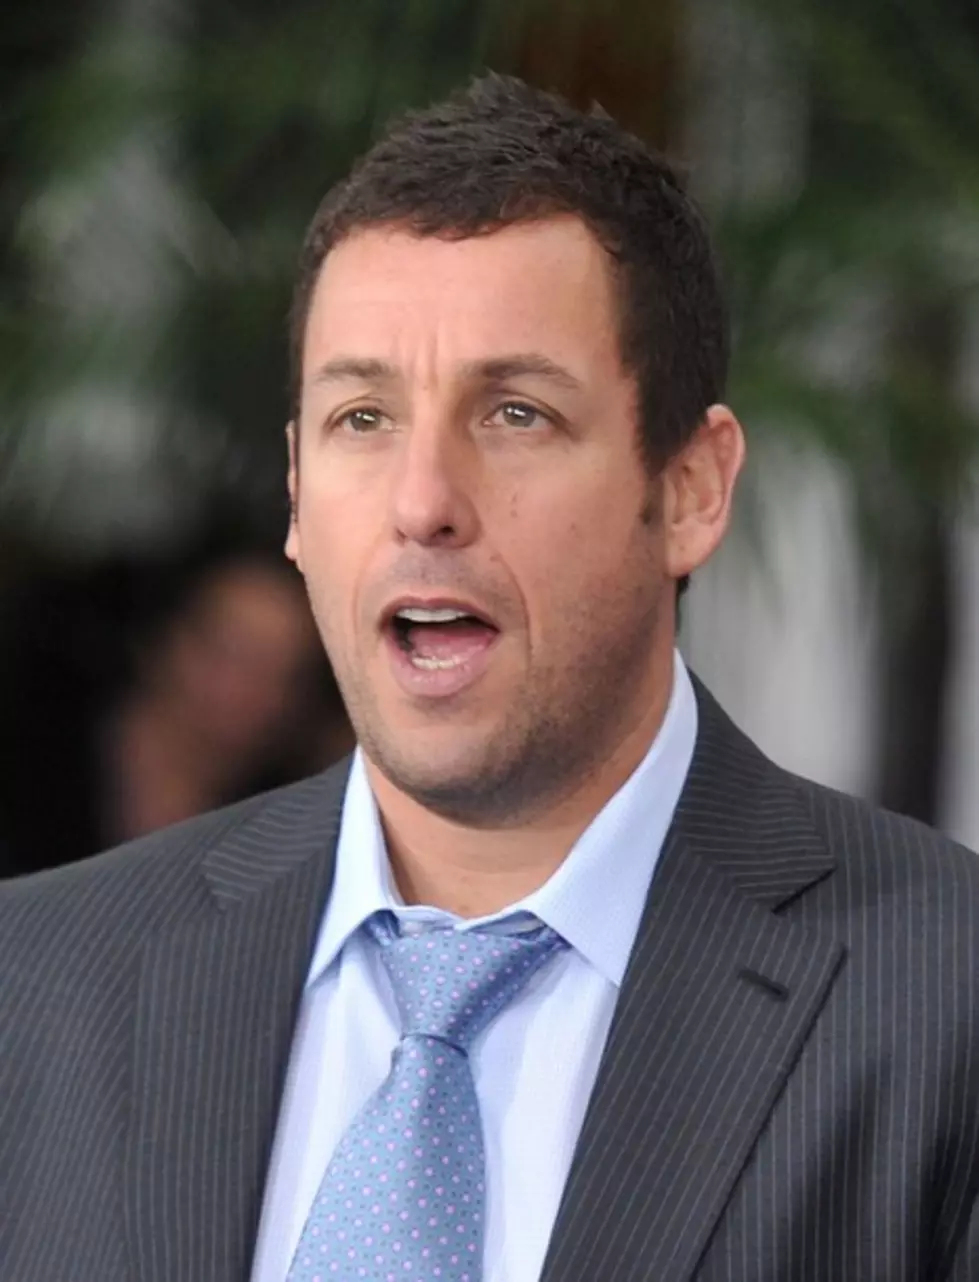 Adam Sandler, What’s Wrong With You?